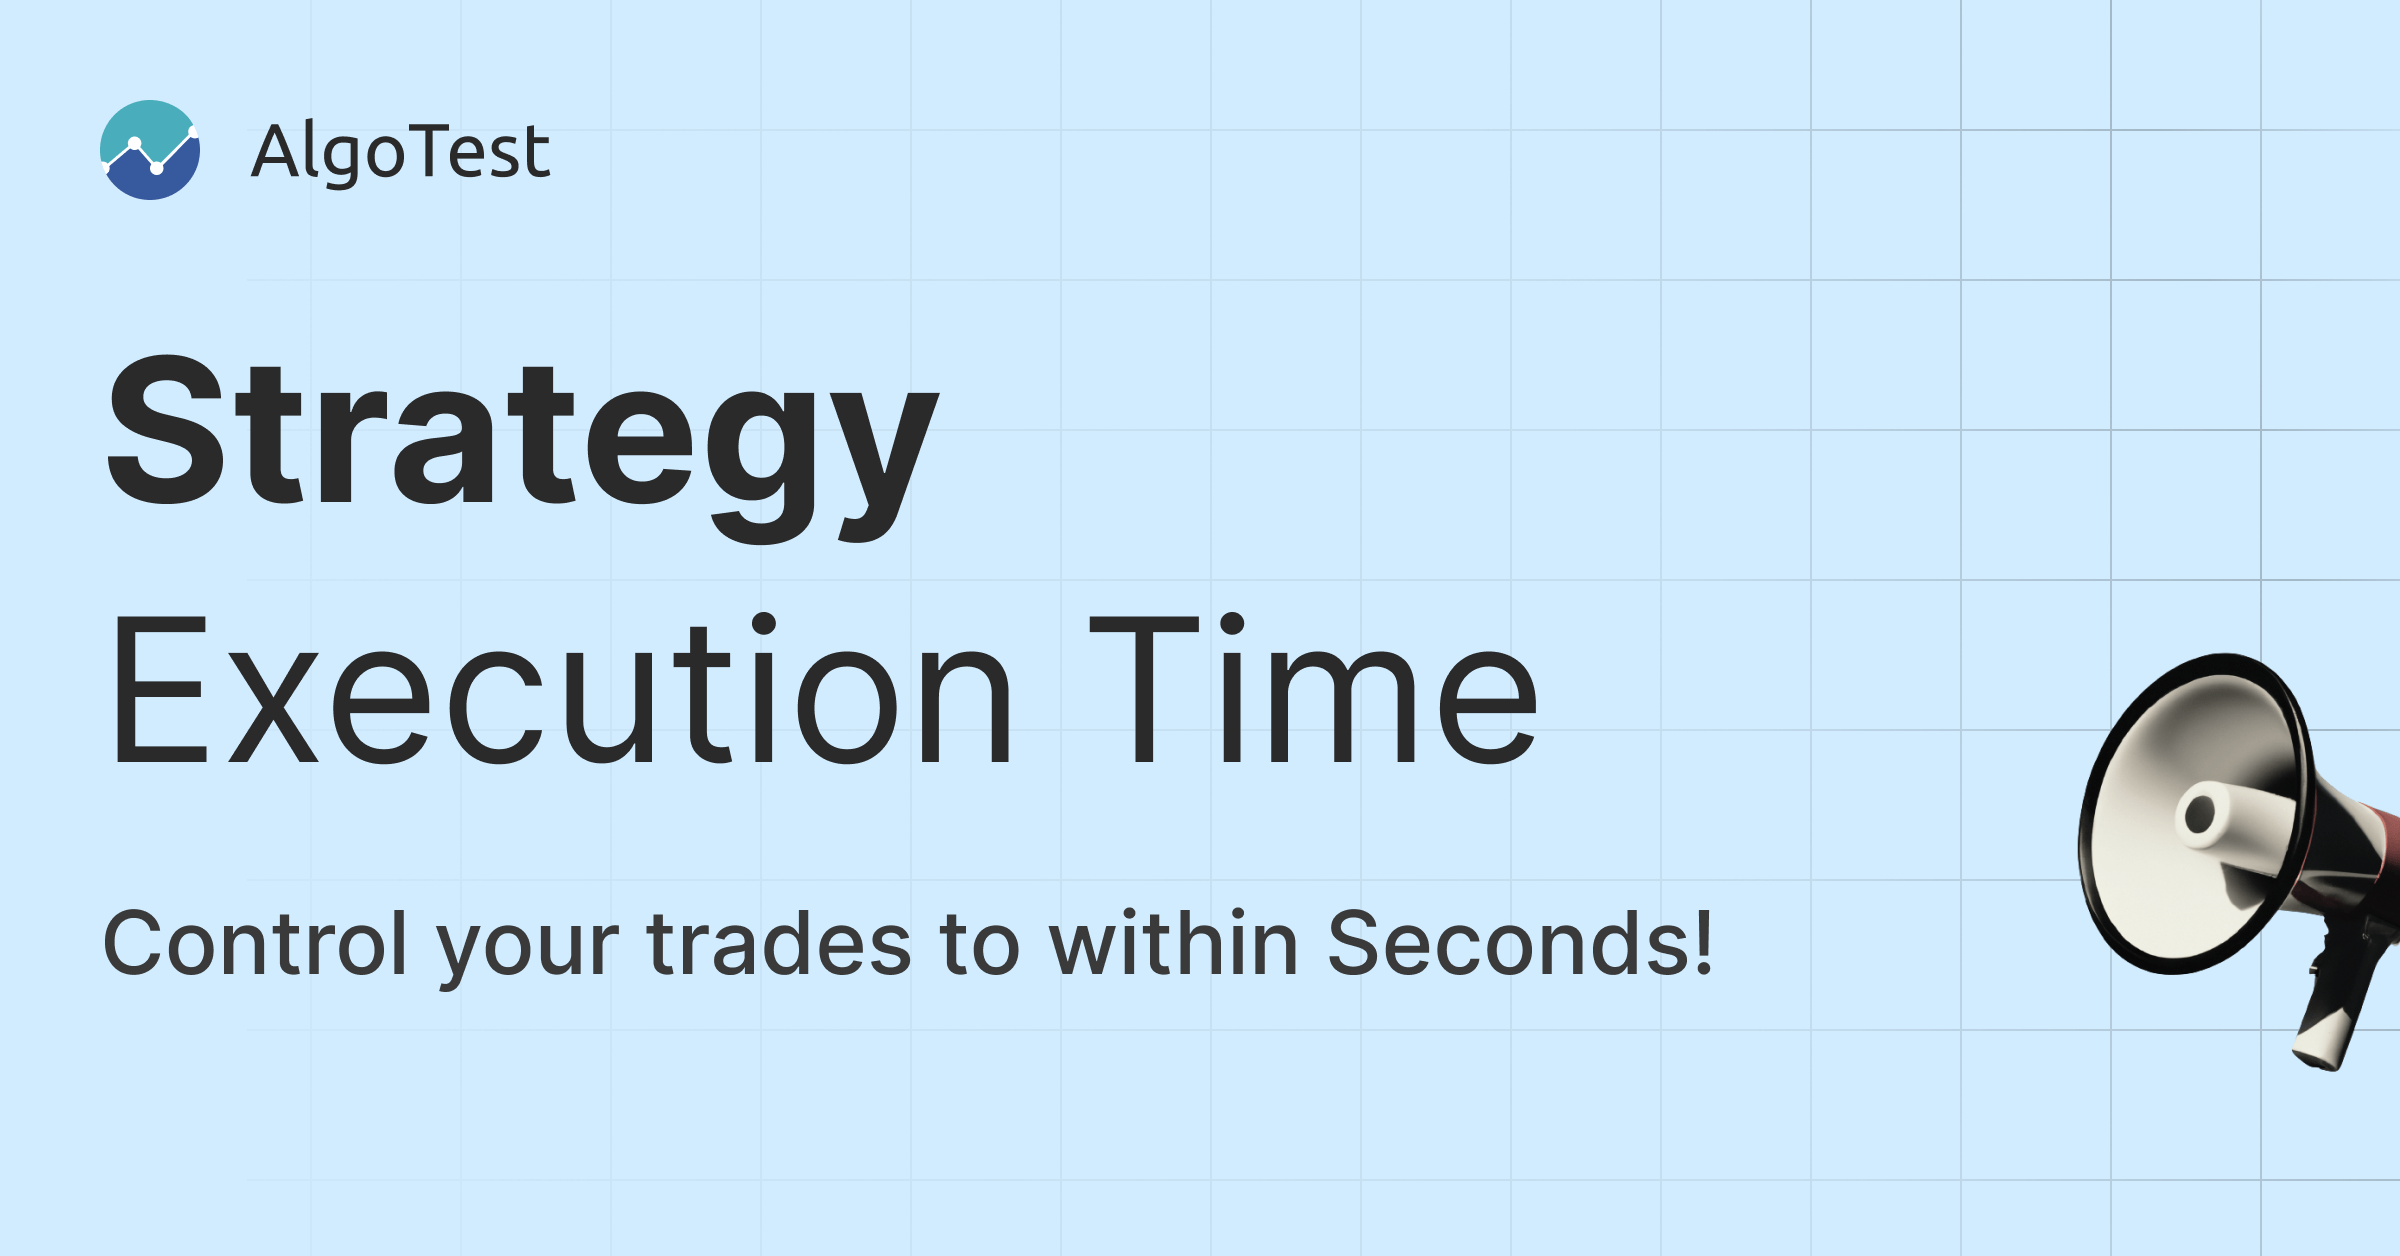 Strategy Execution Time. Now control trades to the second you want to!